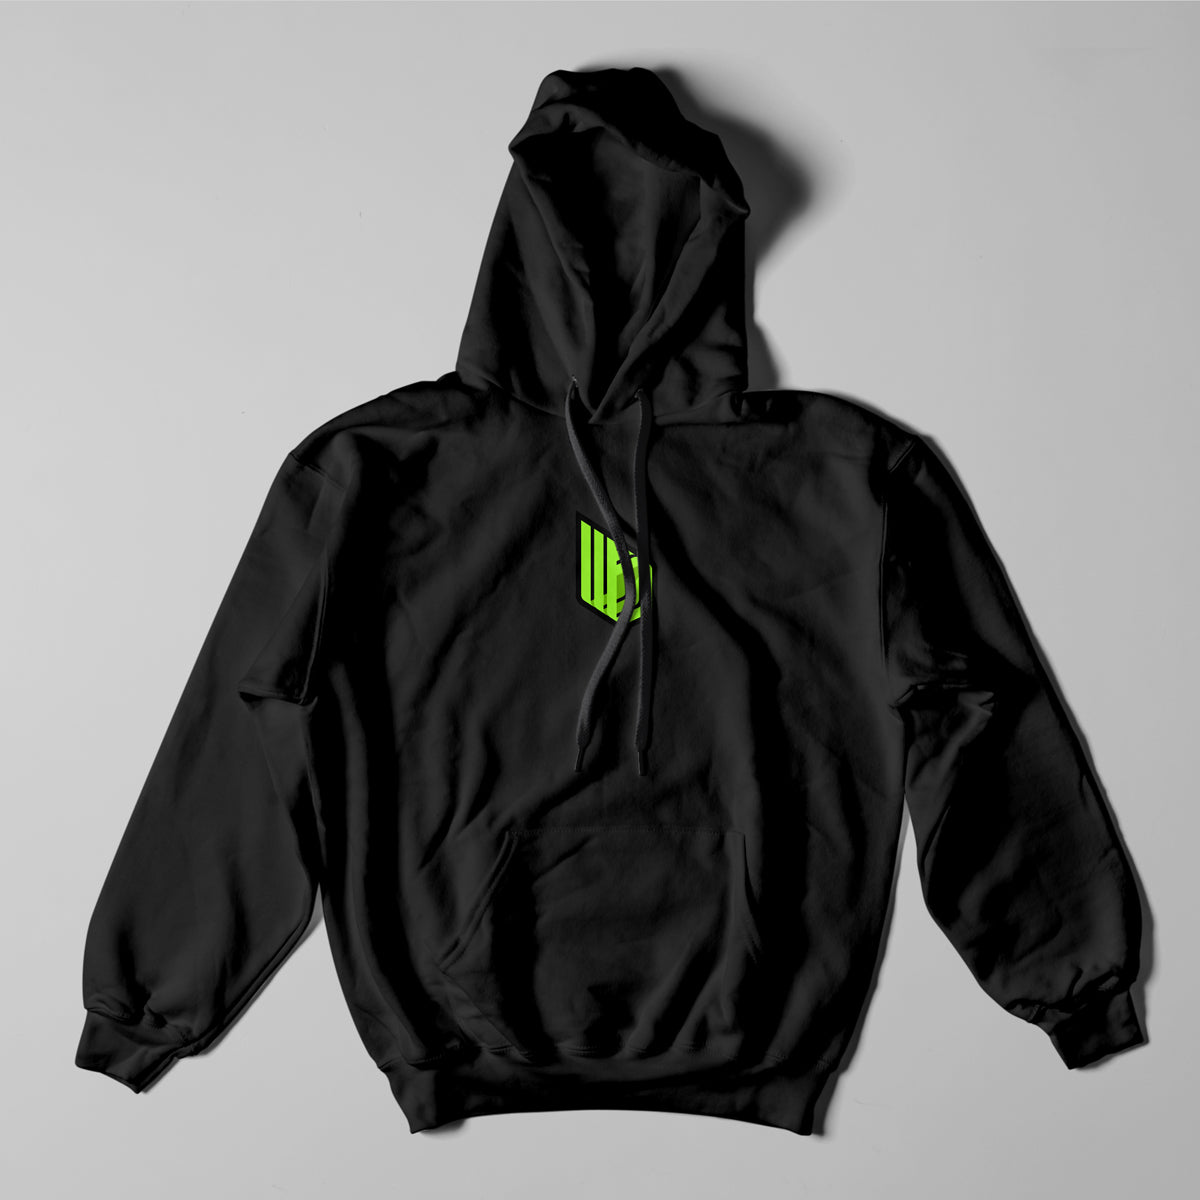 BBB - Survival Brian heavyweight pullover hoodie